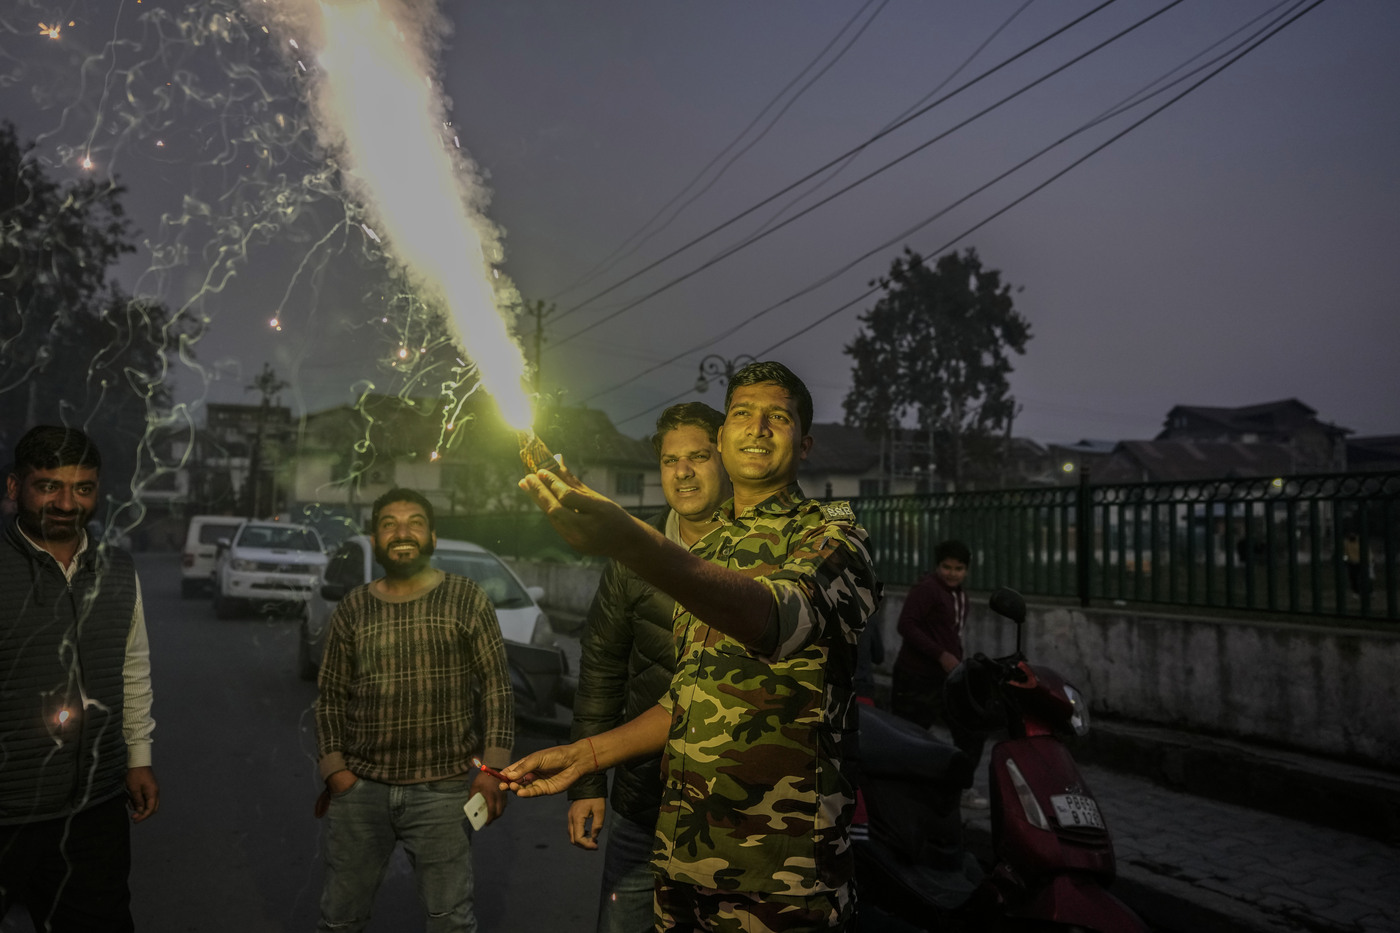 An Indian paramilitary soldier burns firecrackers to celebrate Diwali, the Hindu festival of lights in Srinagar, Indian controlled Kashmir, Monday, Oct. 24, 2022. (AP Photo/Mukhtar Khan)